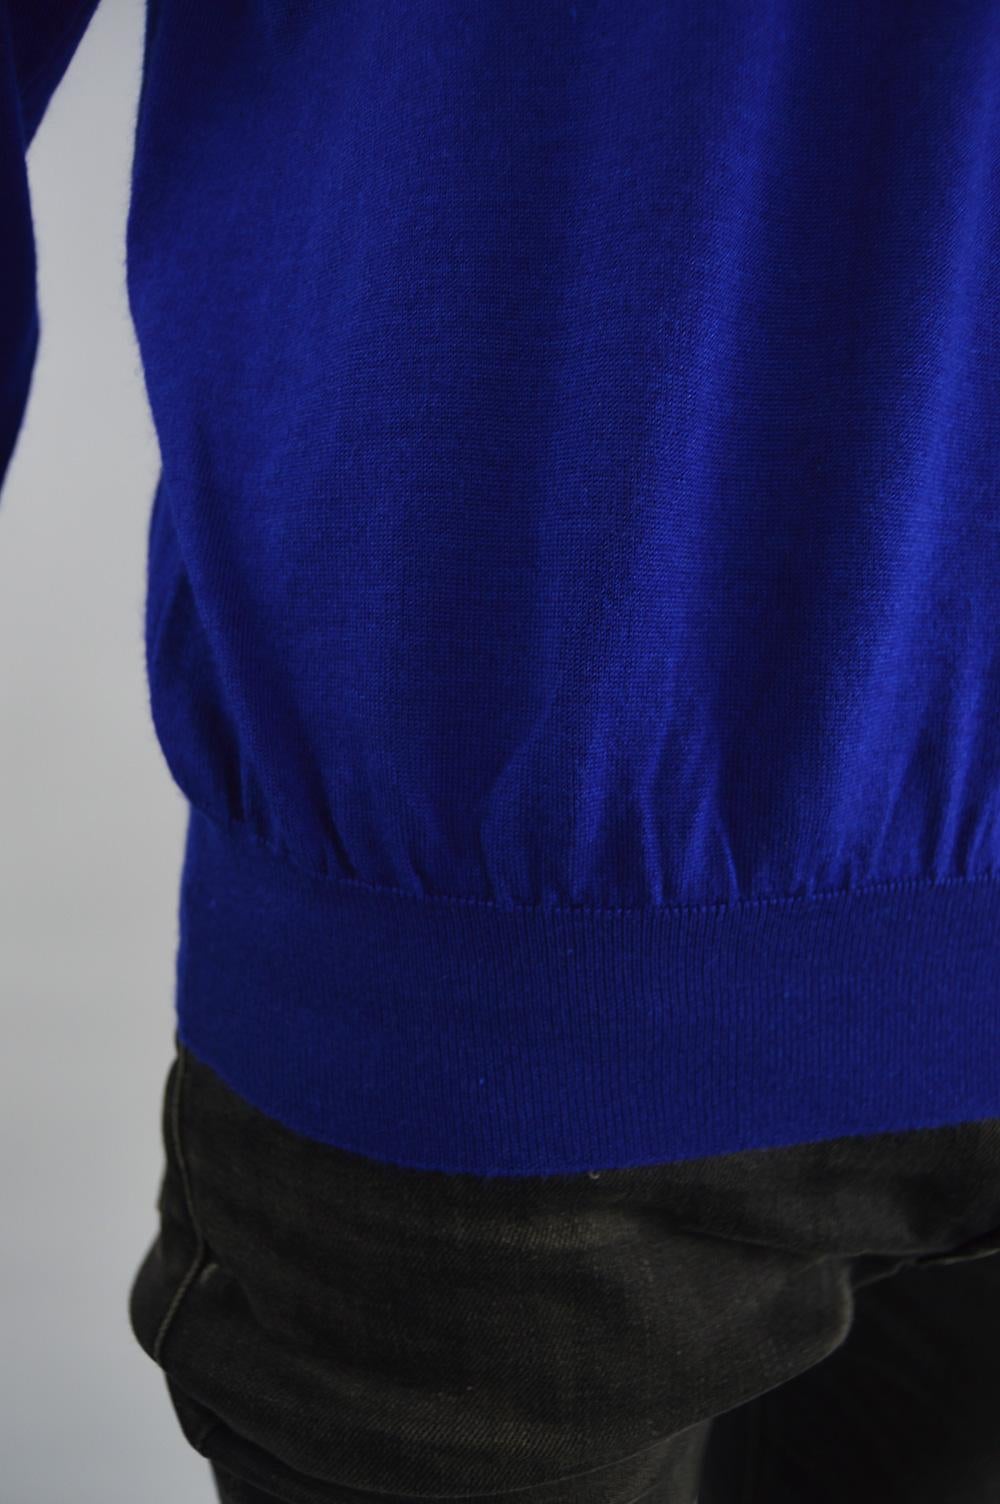 Gianni Versace Mens Cashmere & Silk Royal Blue Vintage Collared Sweater, 1990s  For Sale 1